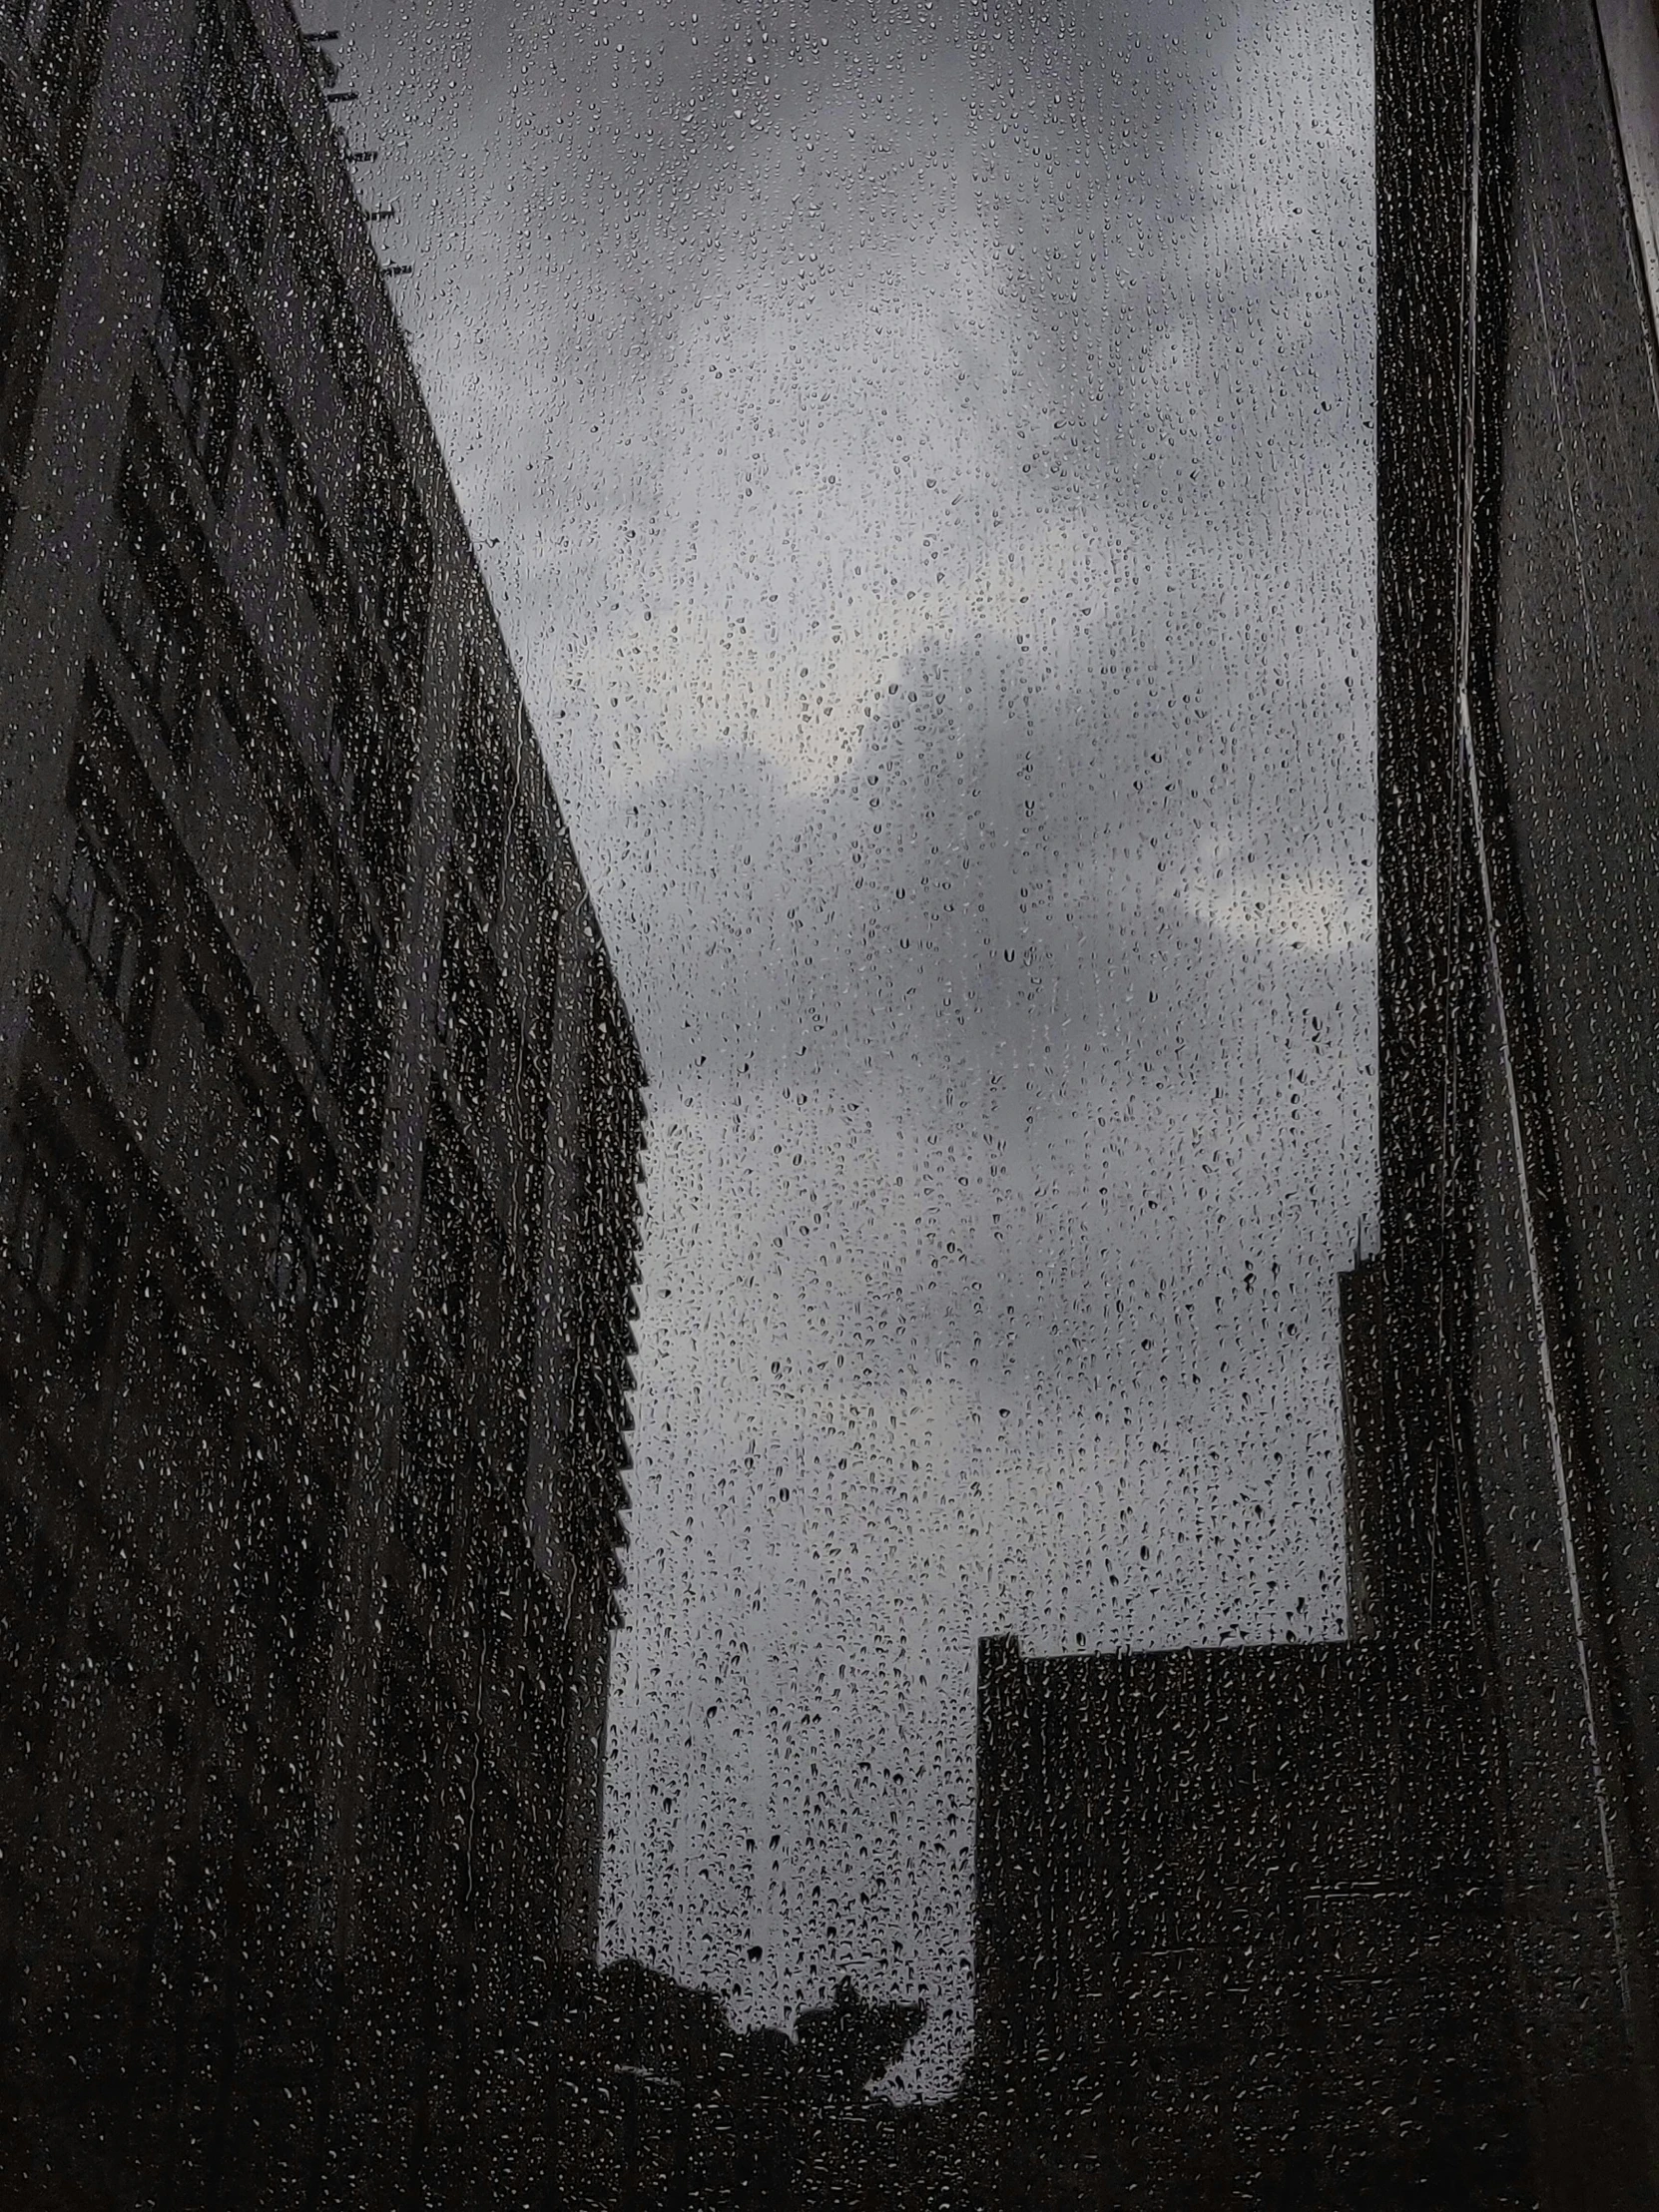 a rain soaked window with buildings in the background, inspired by Thomas Struth, photorealism, the sky is gray, lena oxton, depressing image, it's getting dark